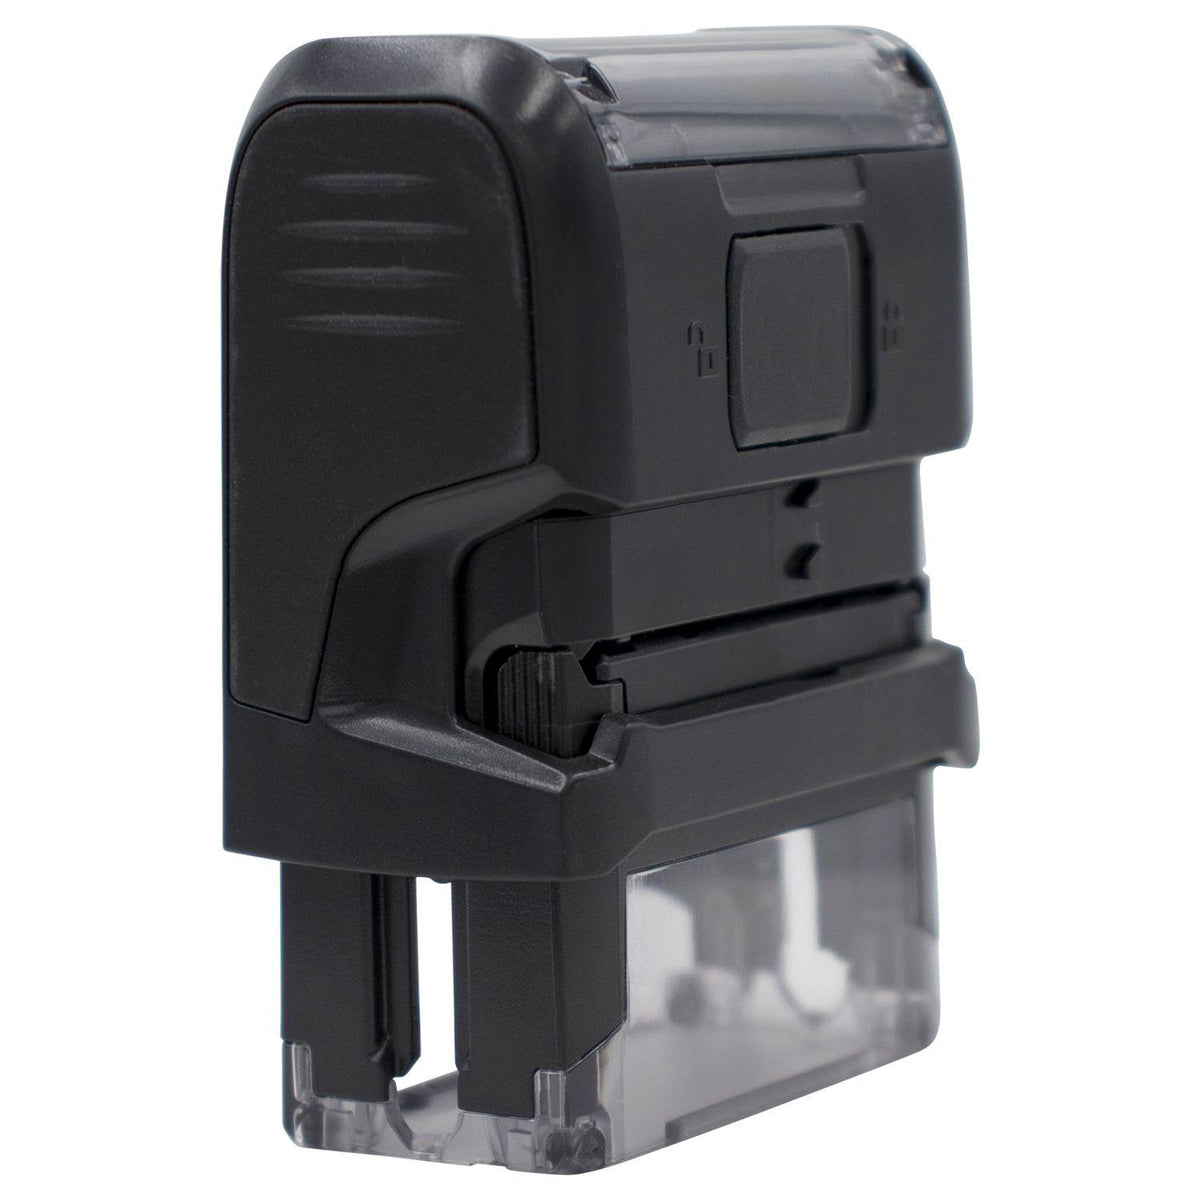 Self-Inking Bold Shred Stamp - Engineer Seal Stamps - Brand_Trodat, Impression Size_Small, Stamp Type_Self-Inking Stamp, Type of Use_Business, Type of Use_General, Type of Use_Office